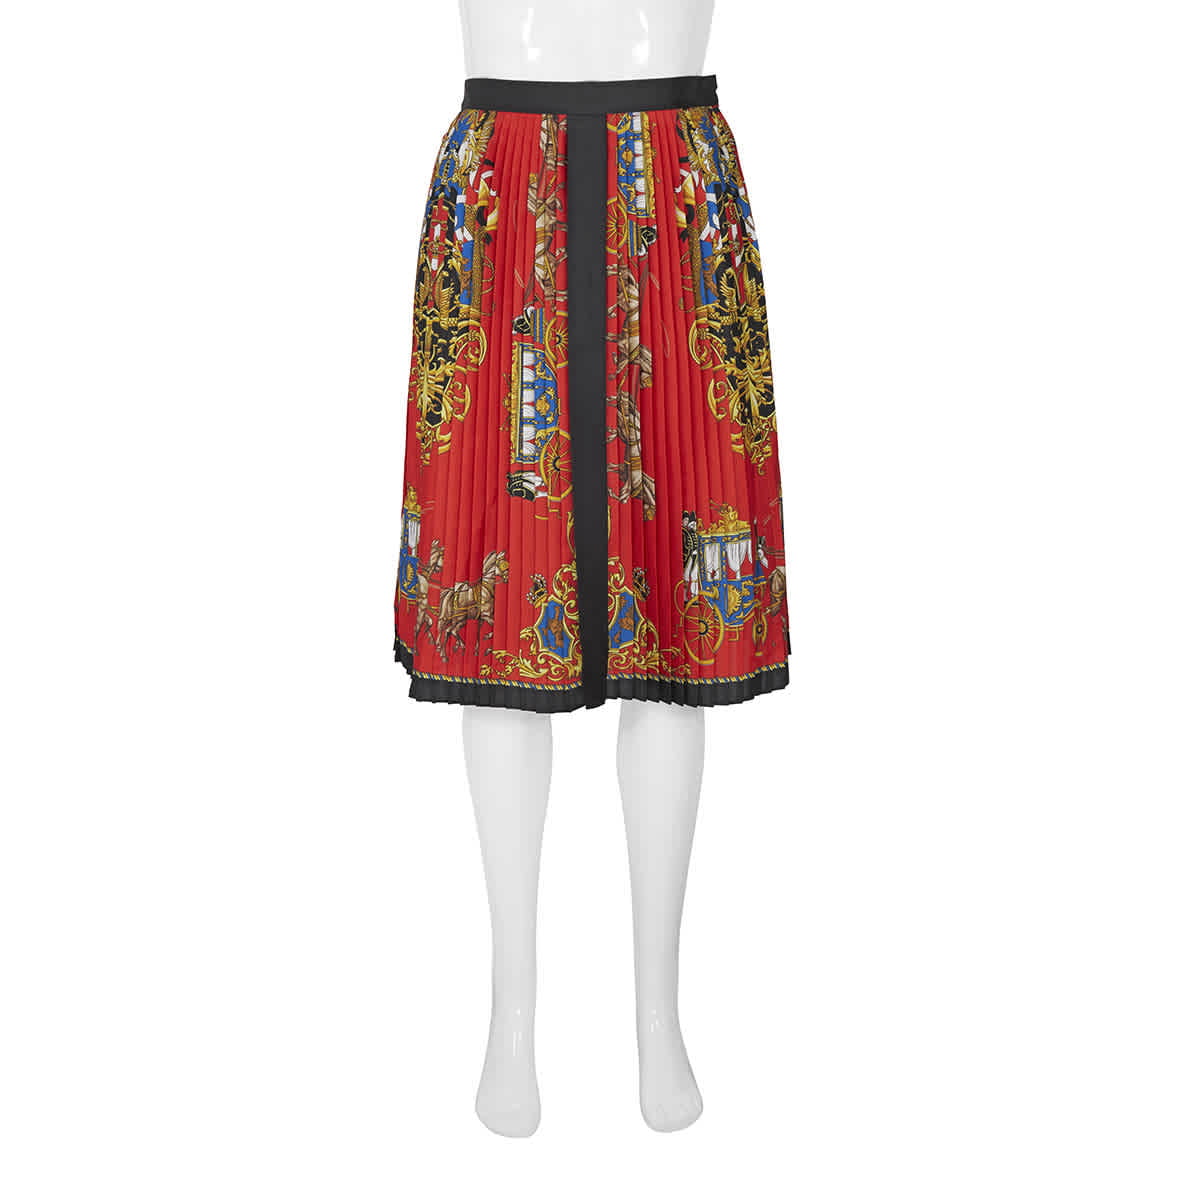 Burberry Ladies Pleated Skirt With Vintage Print, Brand Size 4(US Size 2) -  